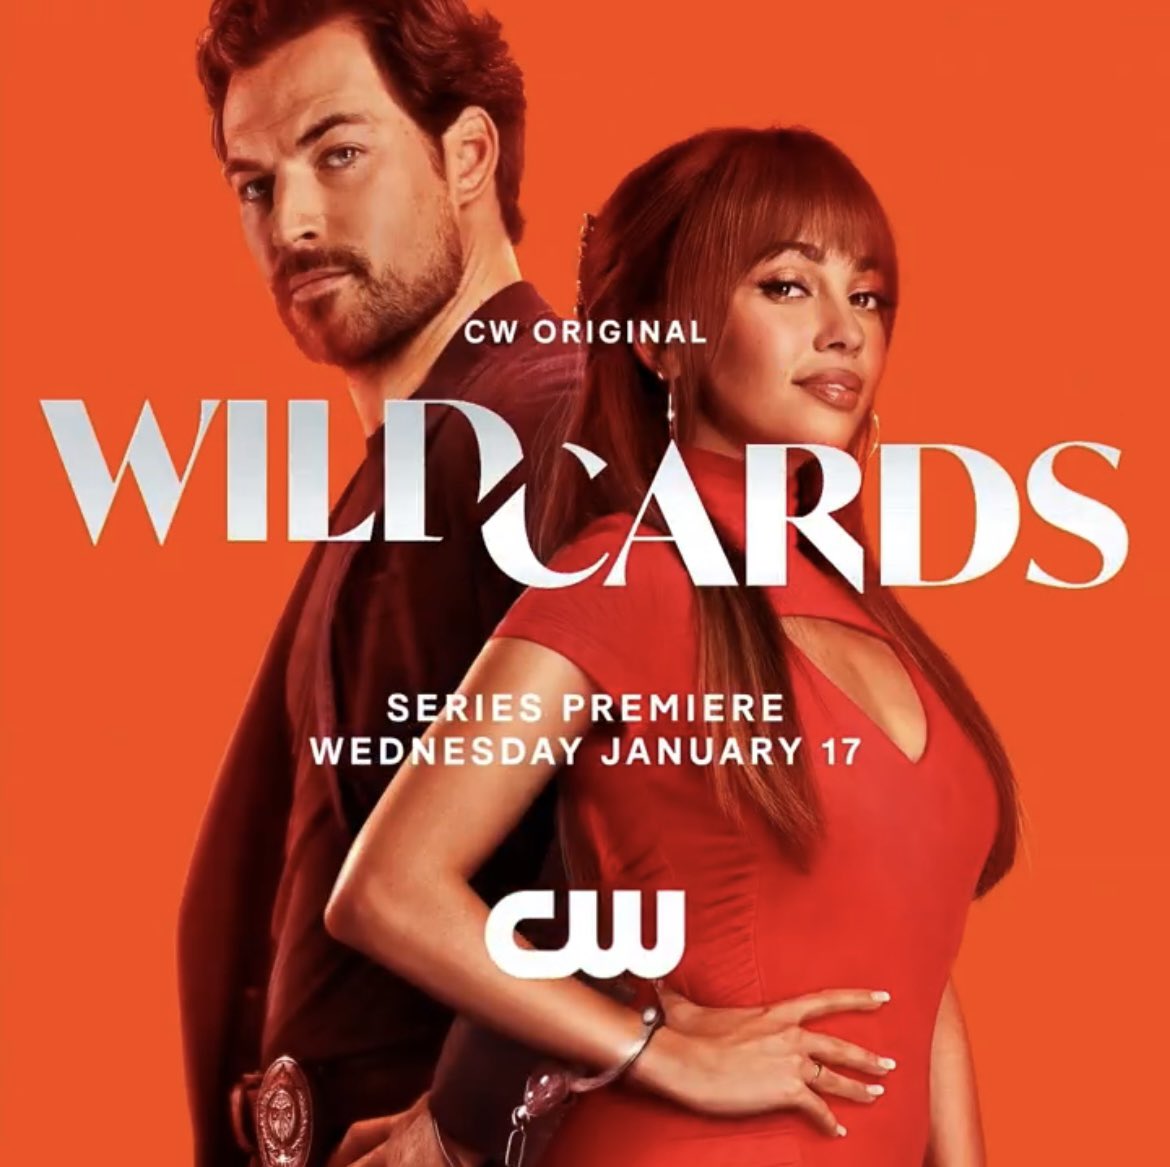 'WILD CARDS premiers on CBC' core news picture